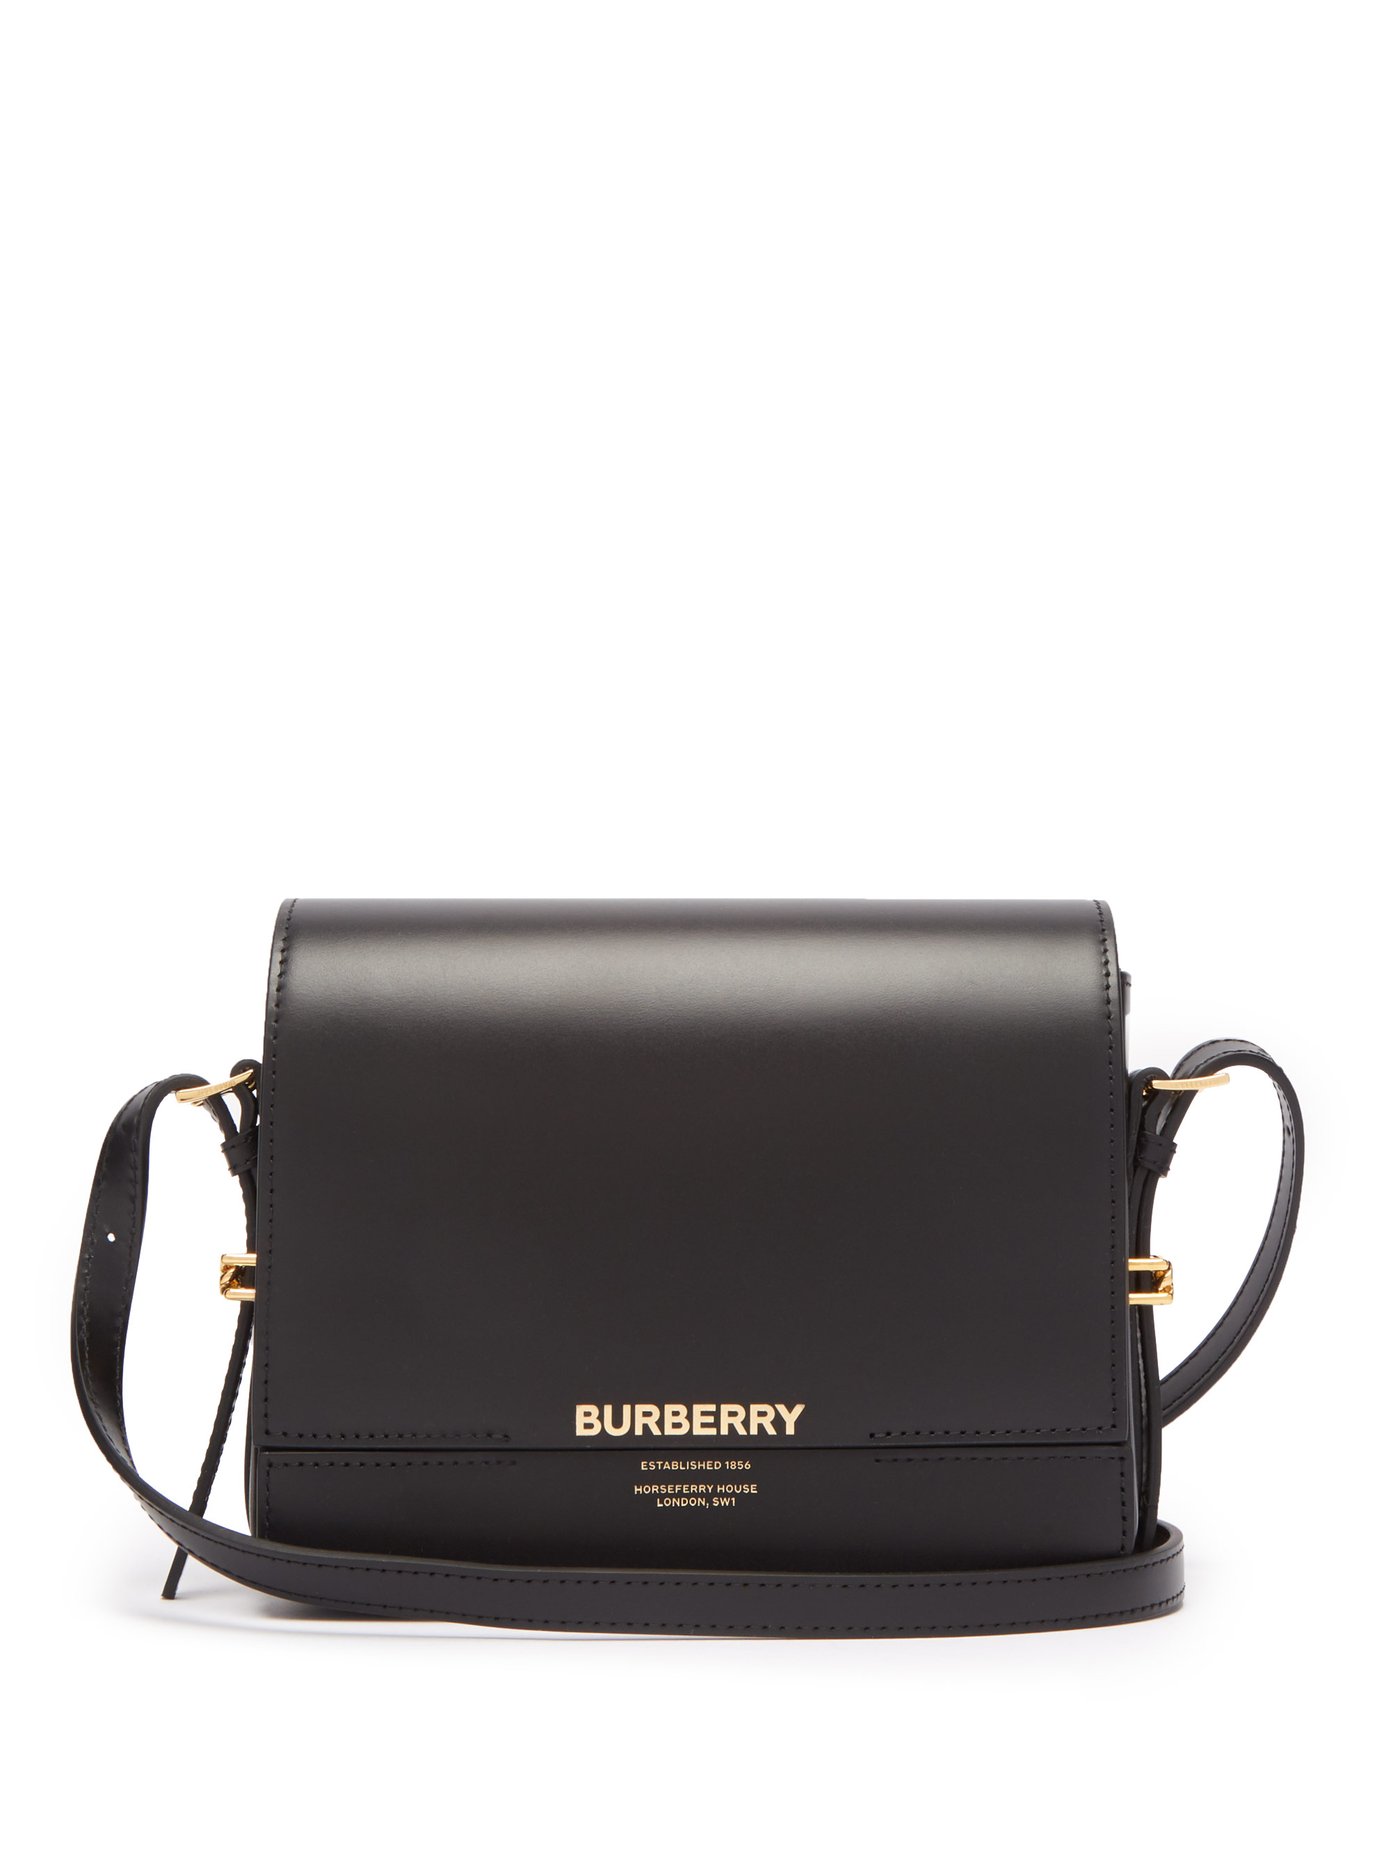 burberry purse and wallet